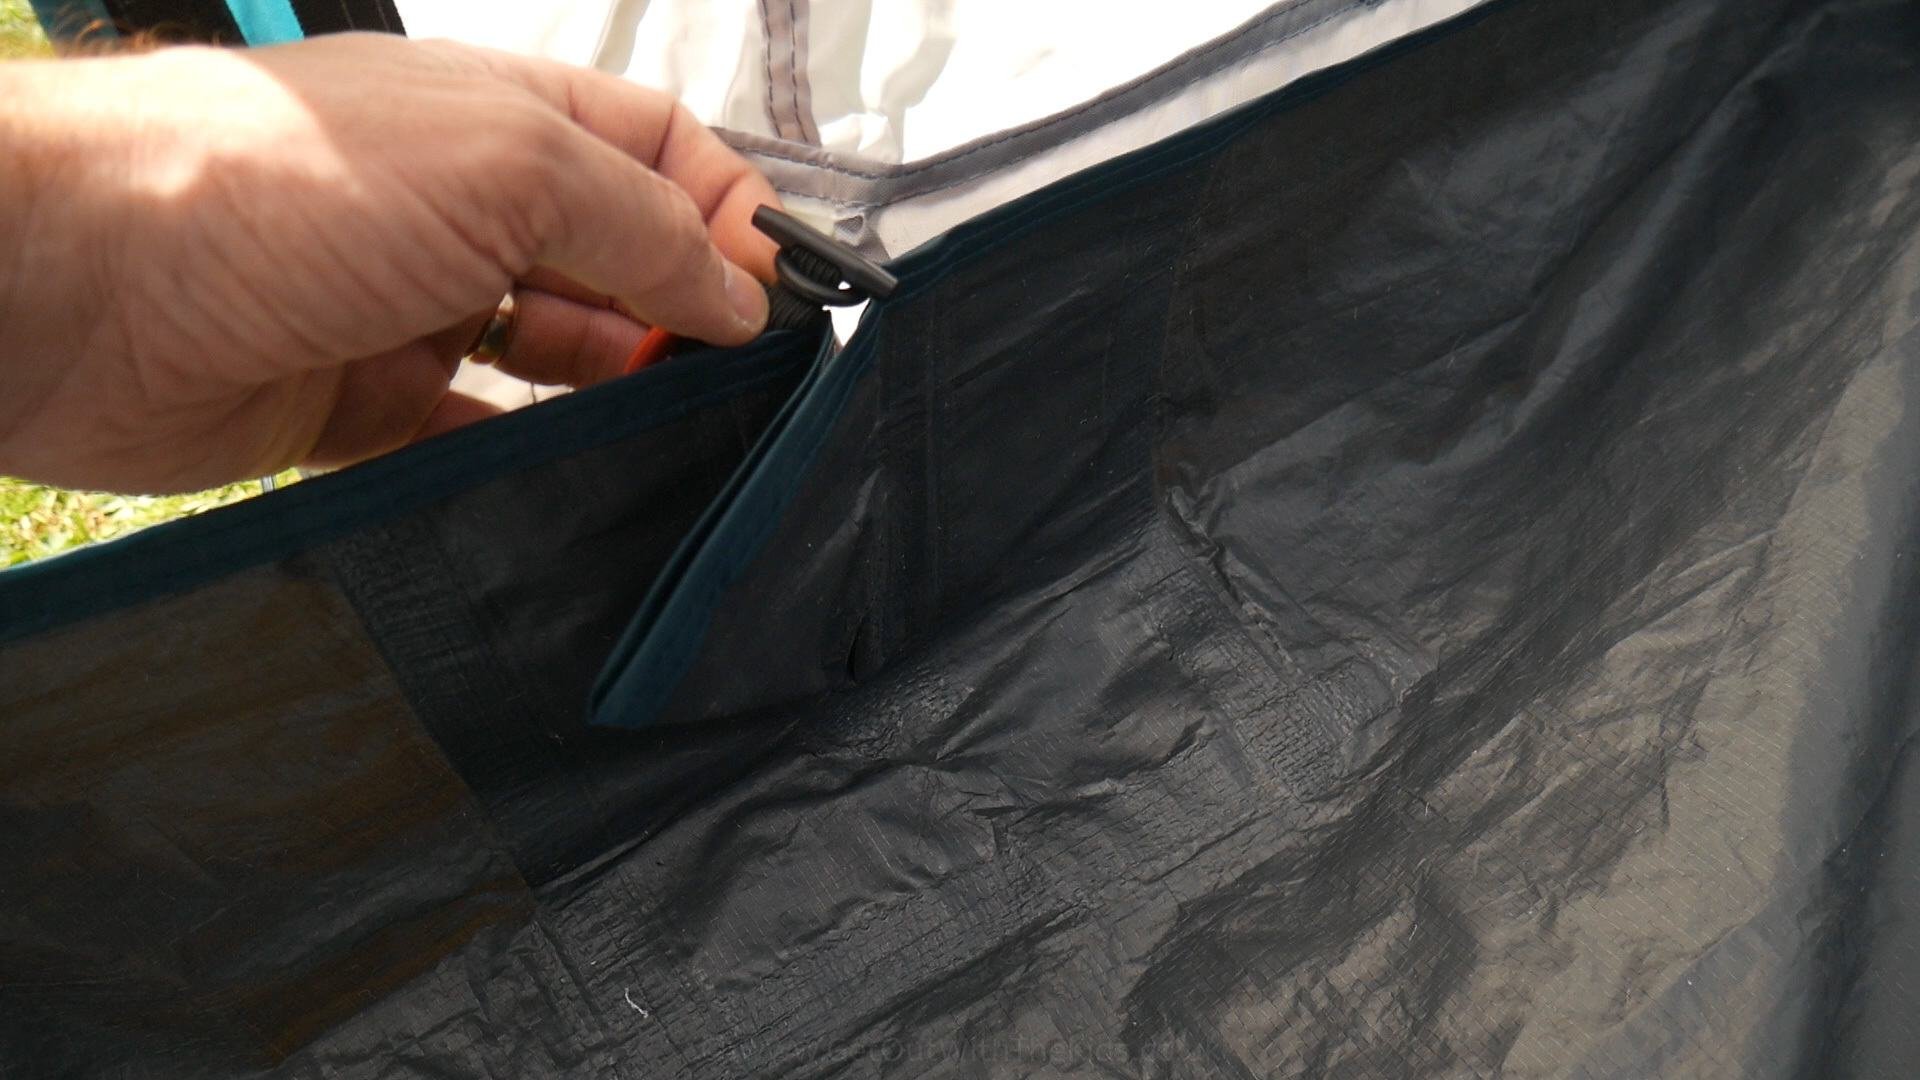 Toggling the groundsheet at the tent door